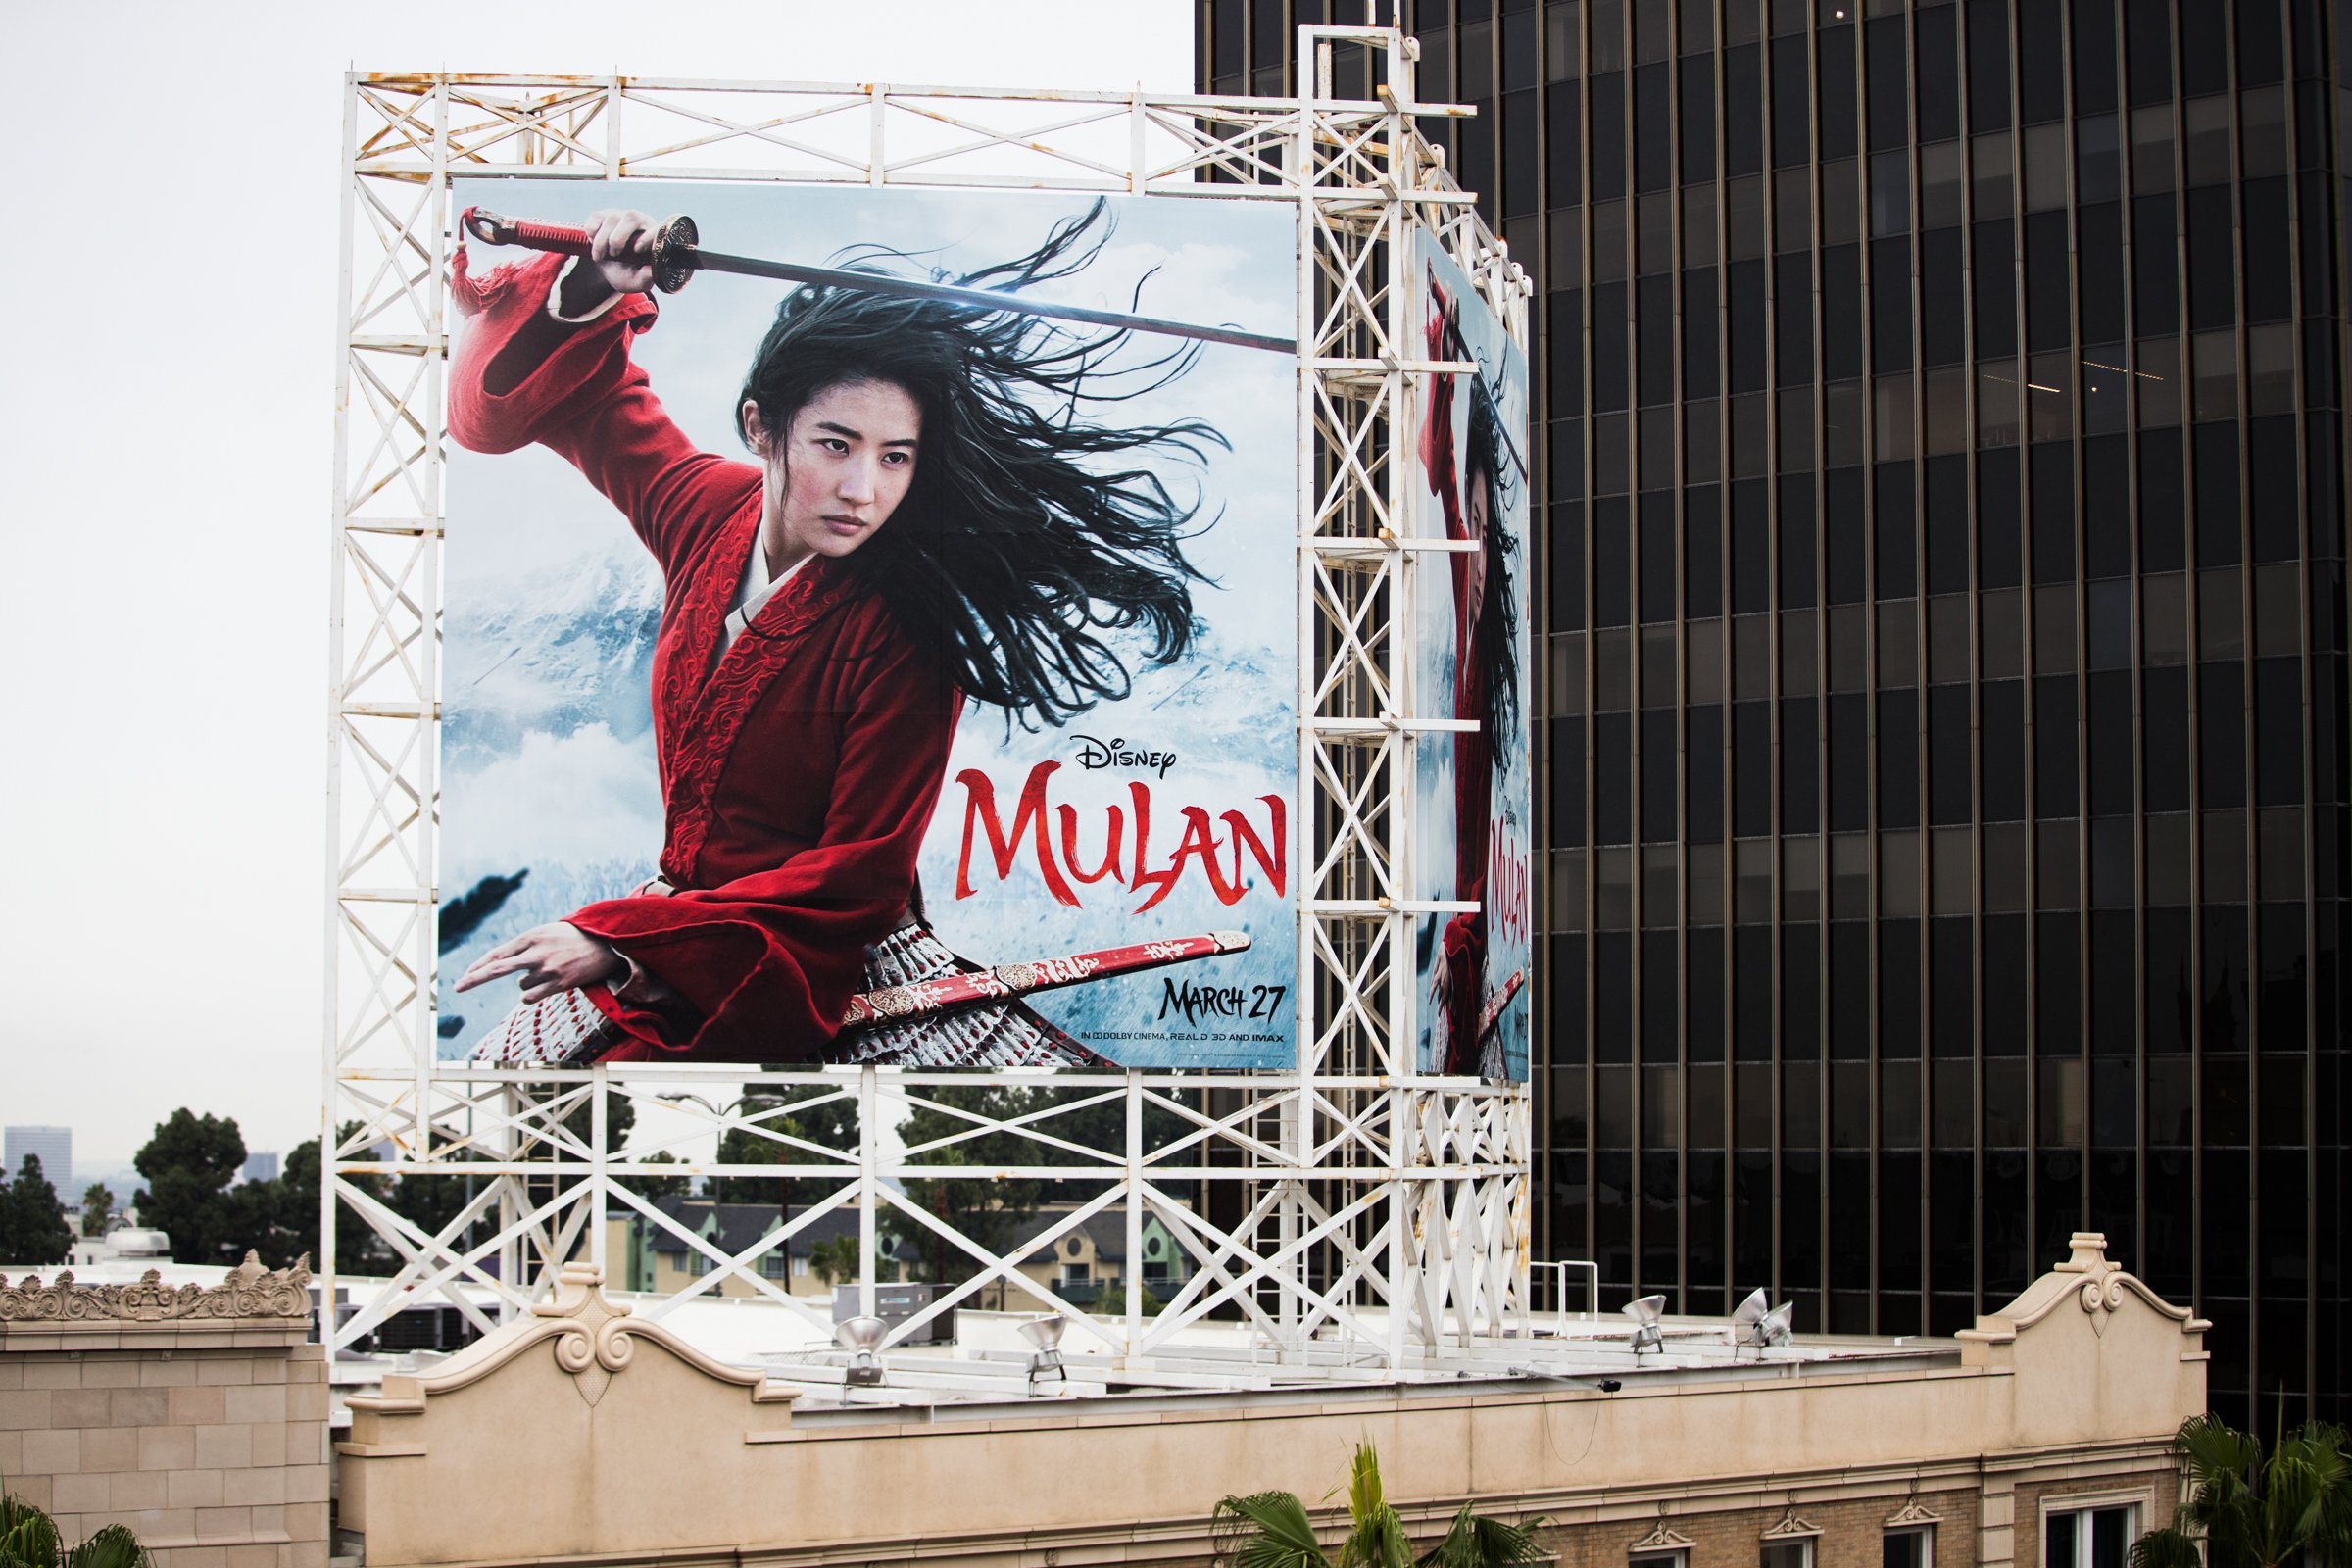 Outdoor ad for Disney's 'Mulan' is seen in Hollywood, California